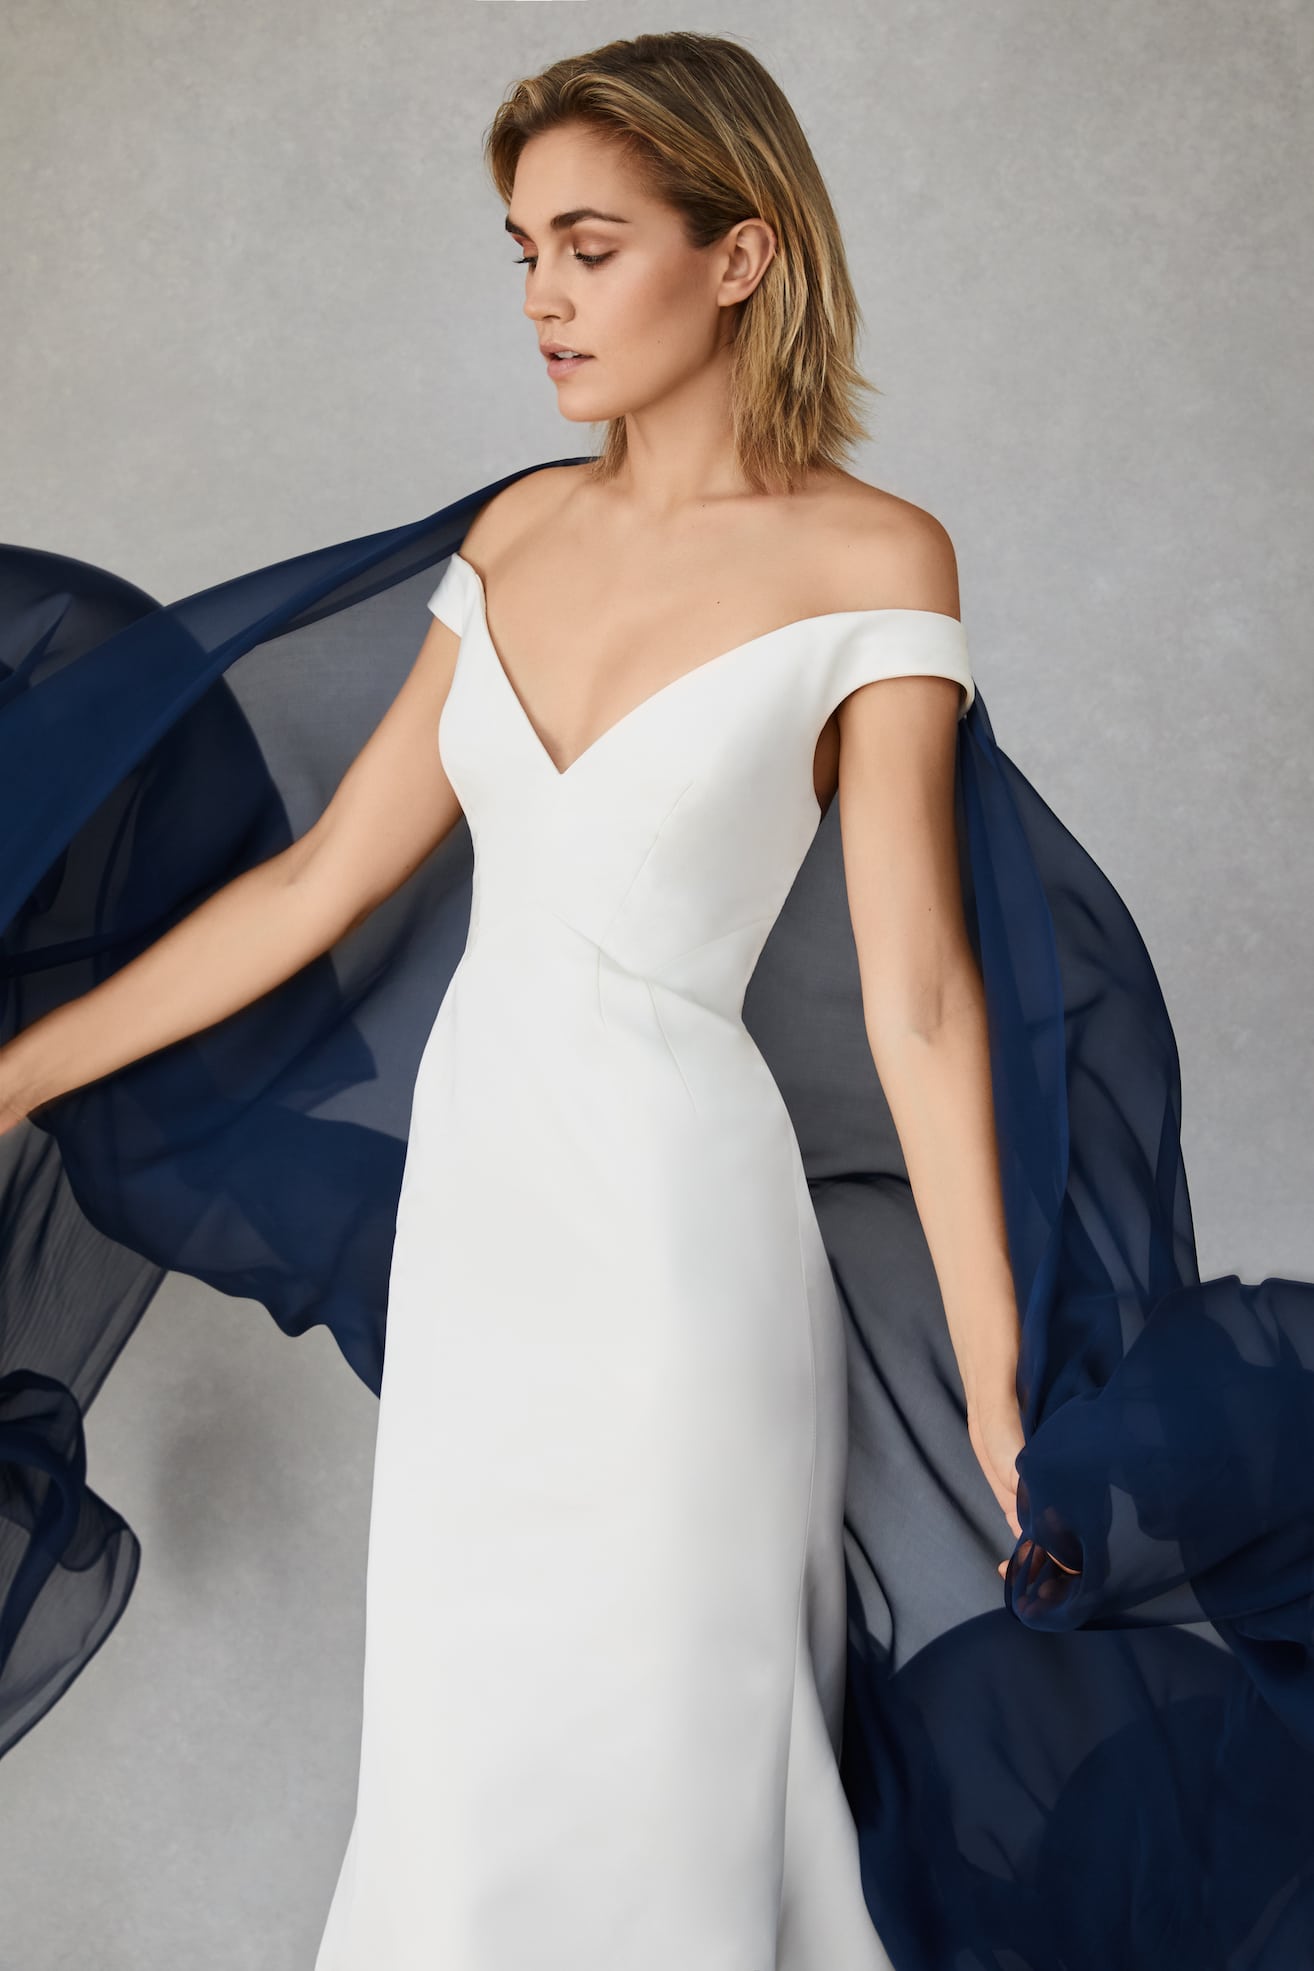 A woman wearing a simple off the shoulder deep v neck wedding dress with a column skirt from Our Story Bridal. She holds a navy sheer wrap that is billowing behind her.